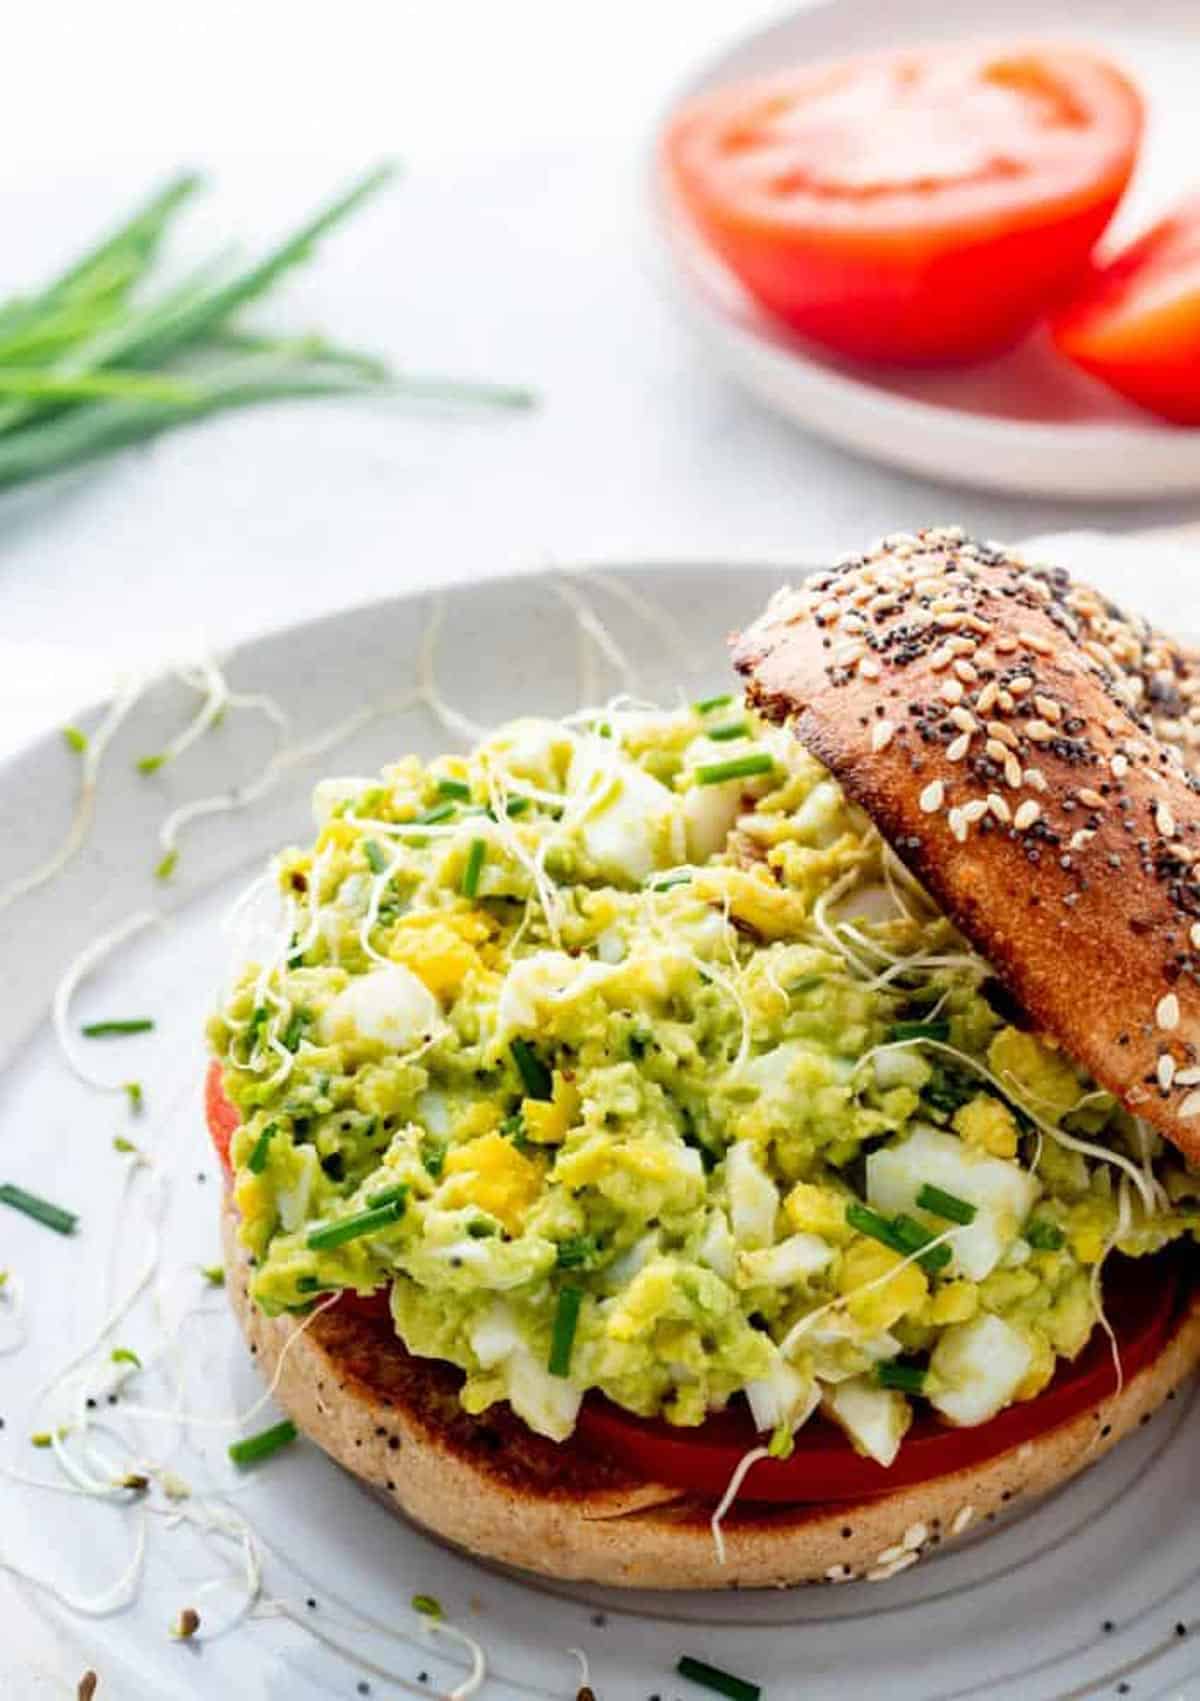 Avocado egg salad on a bagel with tomato slices.